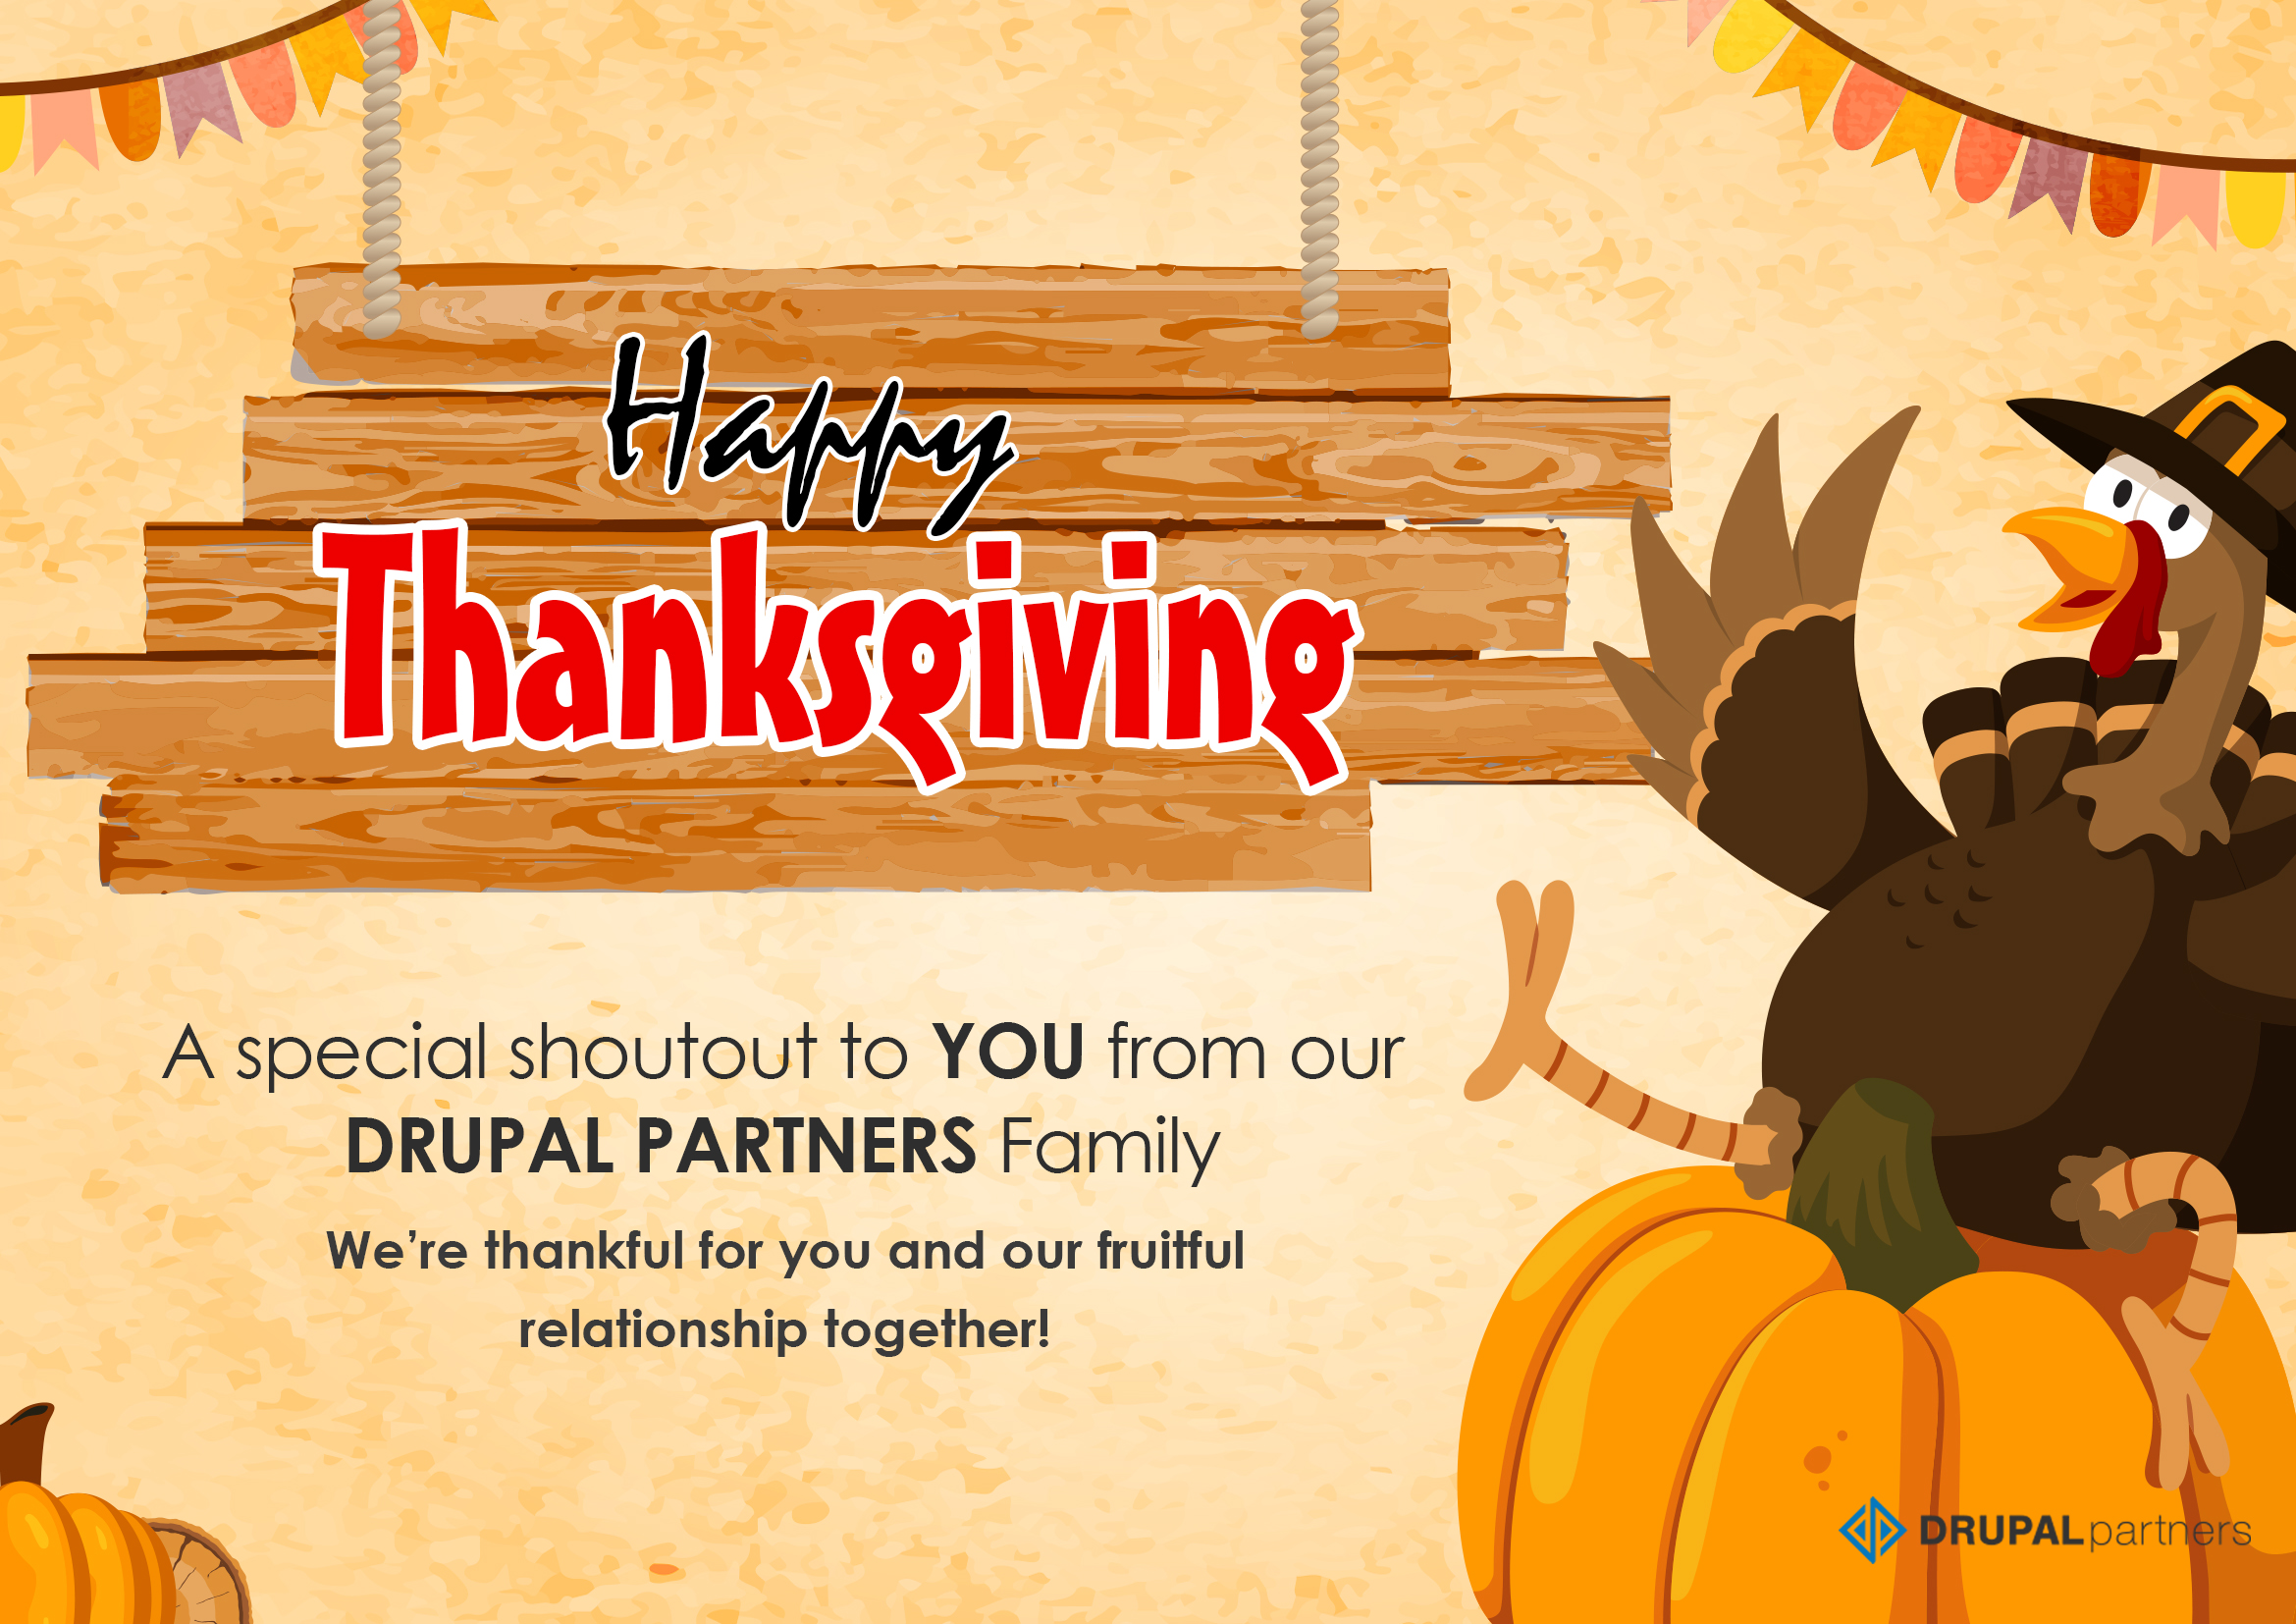 DrupalPartners Wishes You A Happy Thanksgiving